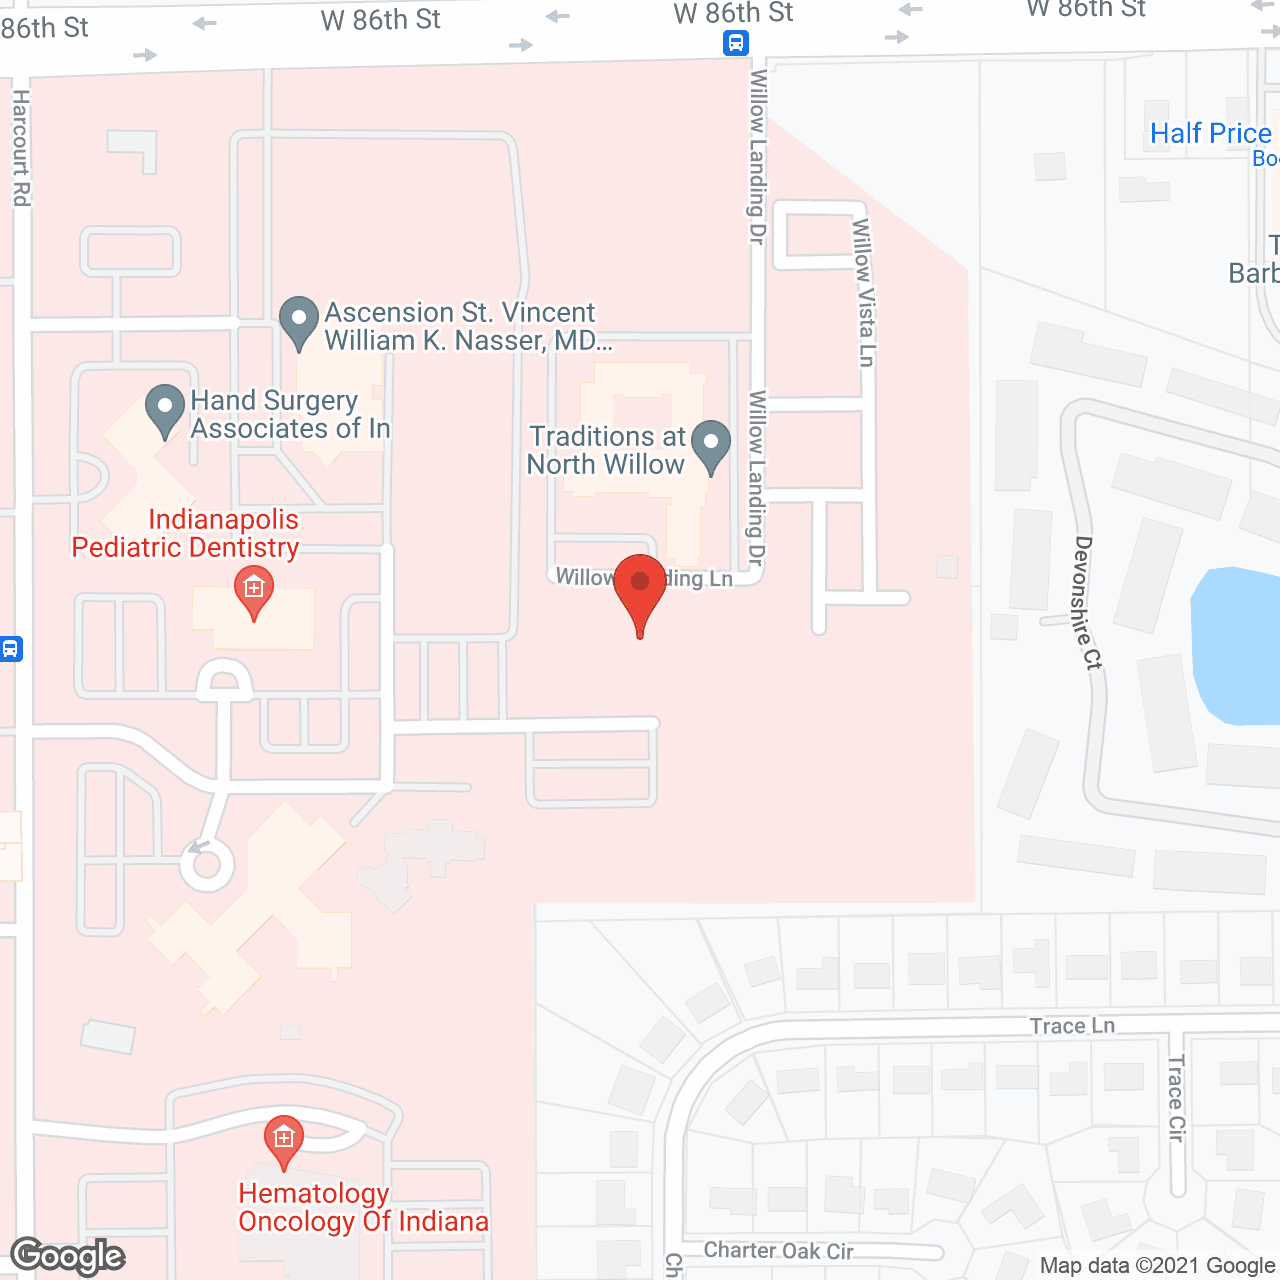 Traditions at North Willow in google map